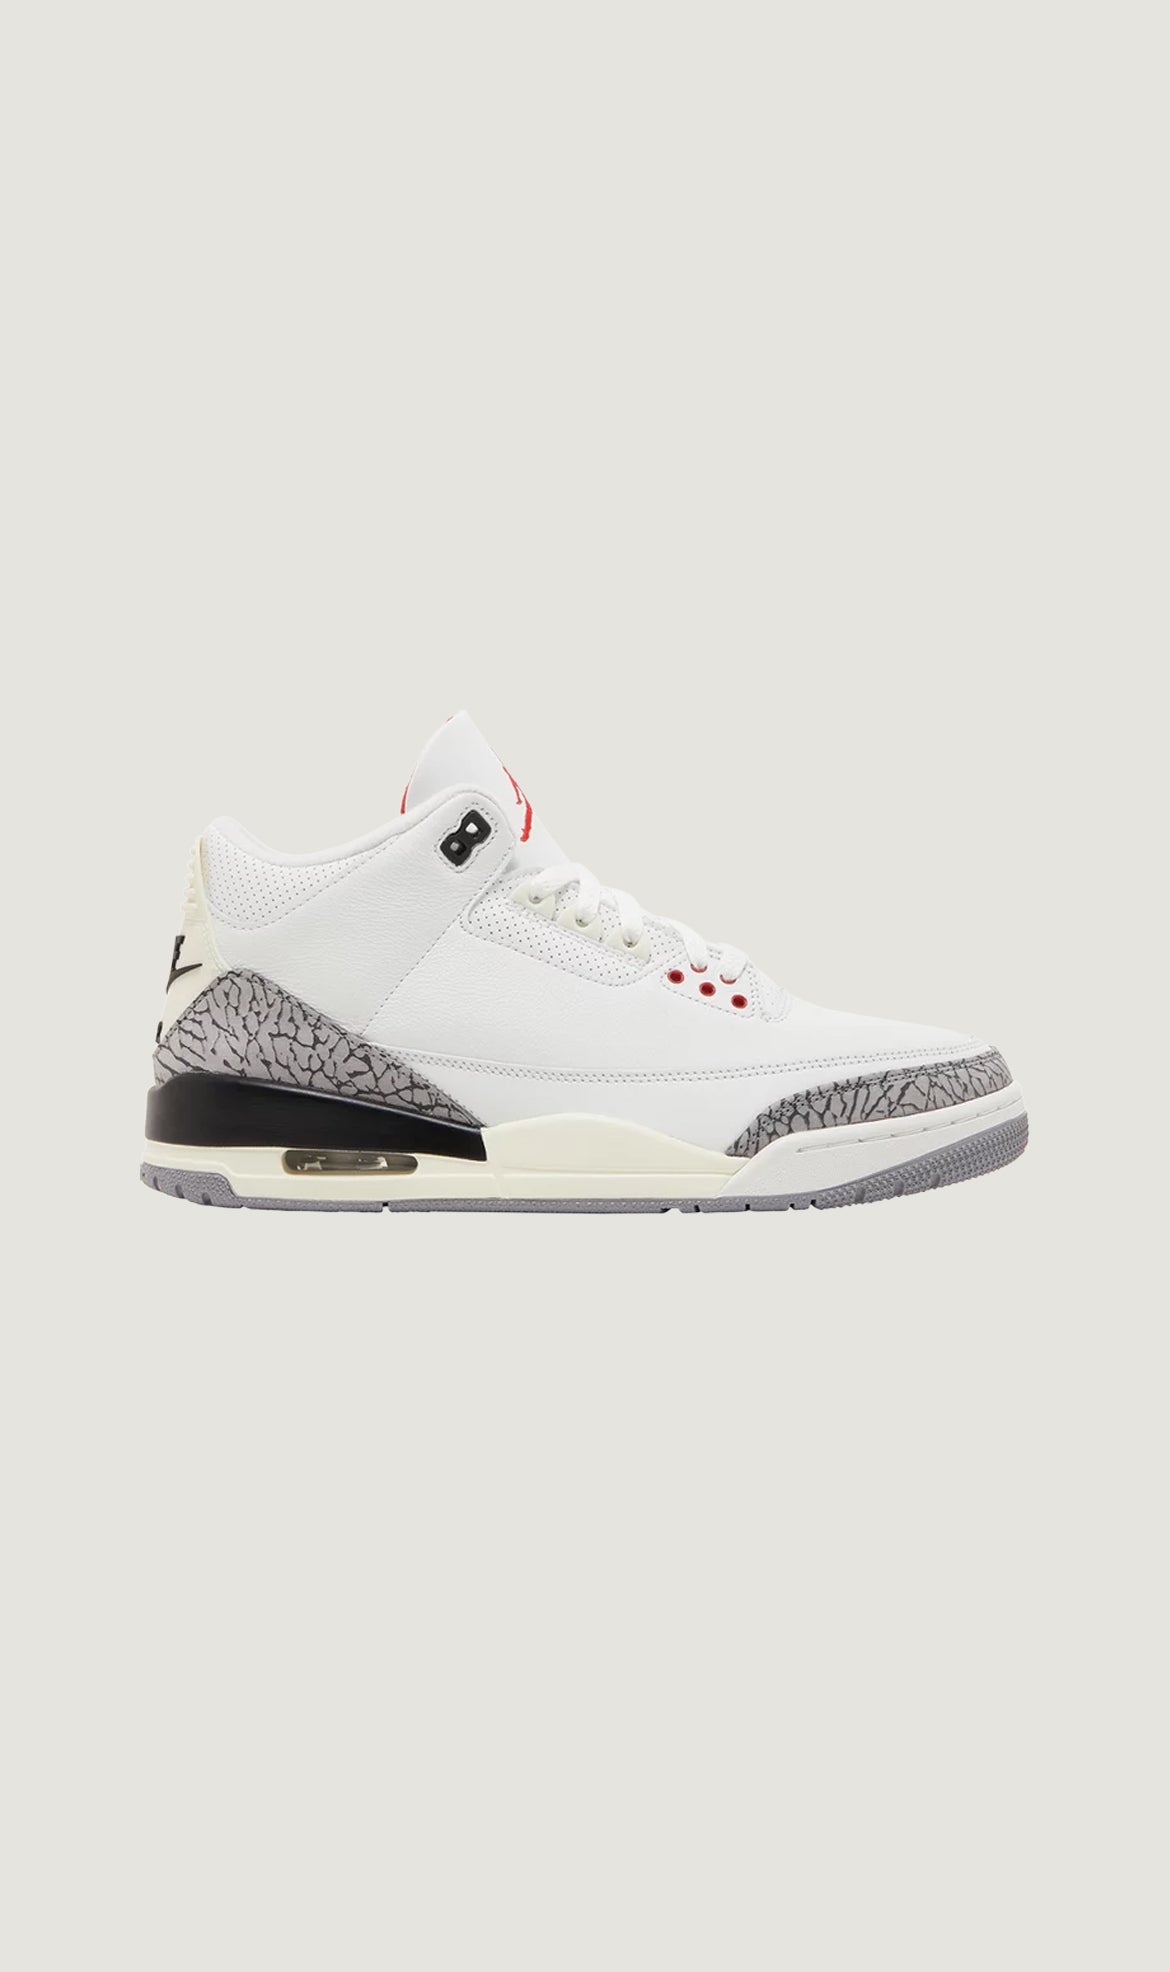 Load image into Gallery viewer, AIR JORDAN 3 RETRO - WHITE CEMENT
